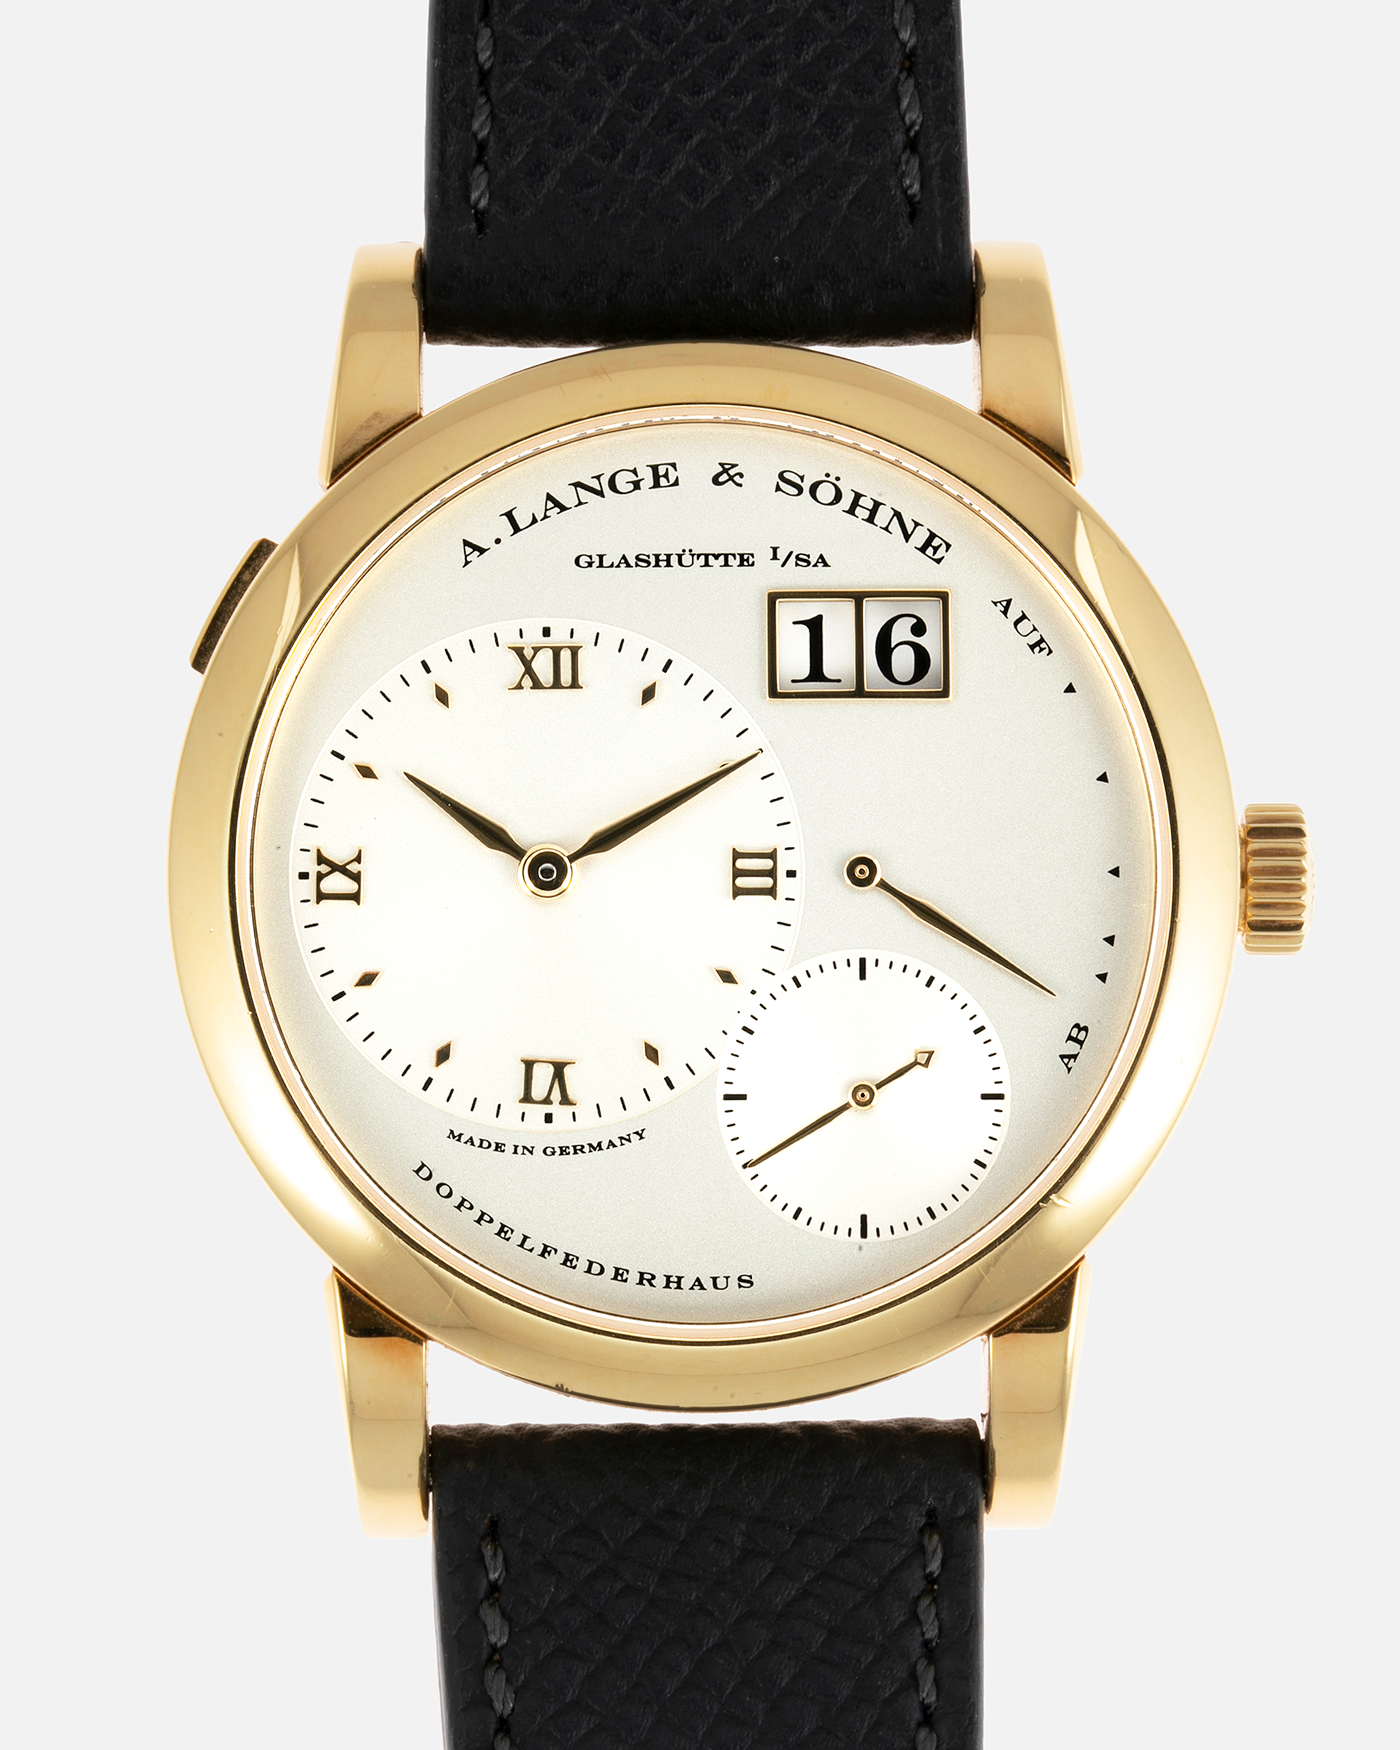 Brand: A. Lange & Söhne Year: 2000’s Model: Lange 1 Reference Number: 101.027 Material: 18-carat Yellow Gold Movement: Cal. L901.0, Manual-Winding Case Diameter: 38.5mm Bracelet/Strap: Molequin Anthracite Textured Calf Strap and A. Lange & Sohne Black Alligator Strap with 18k Yellow Gold Tang Buckle